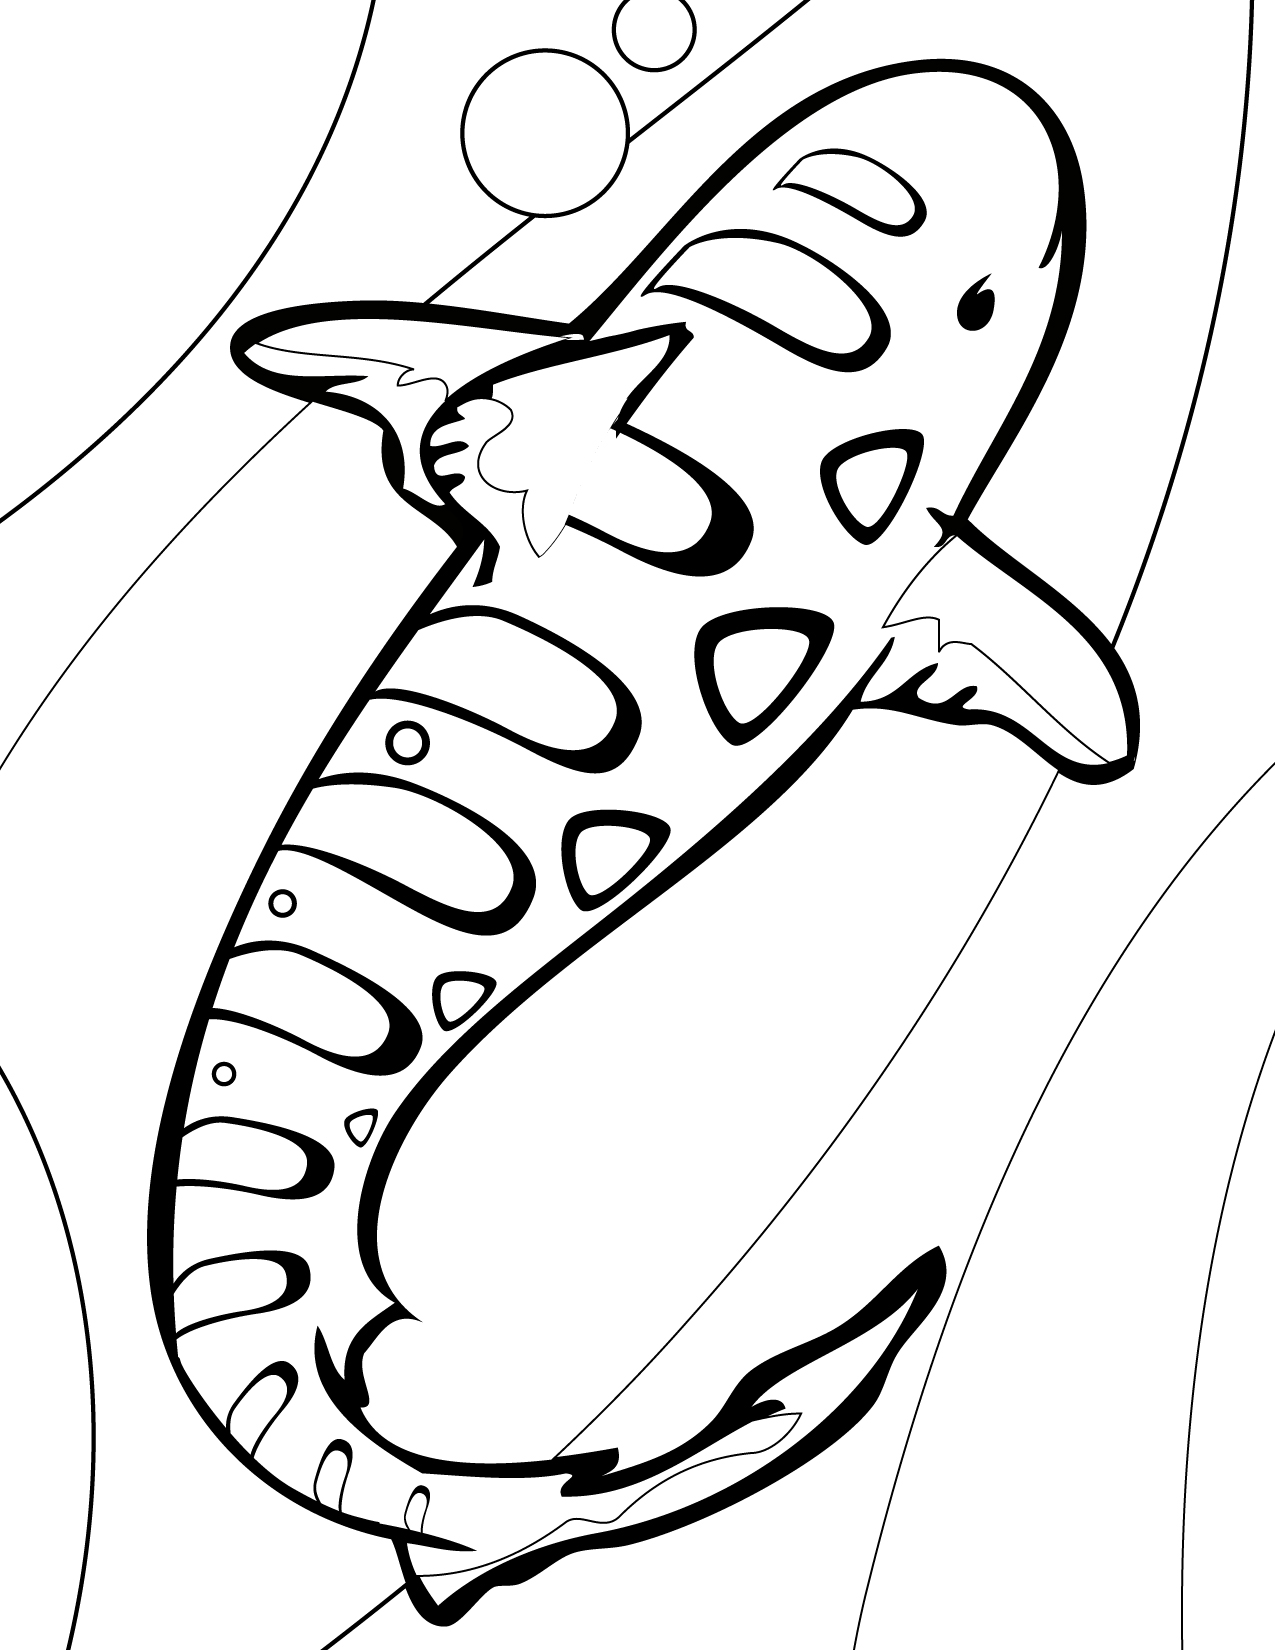 Shark Coloring Pages (18) Coloring Kids - Coloring Kids